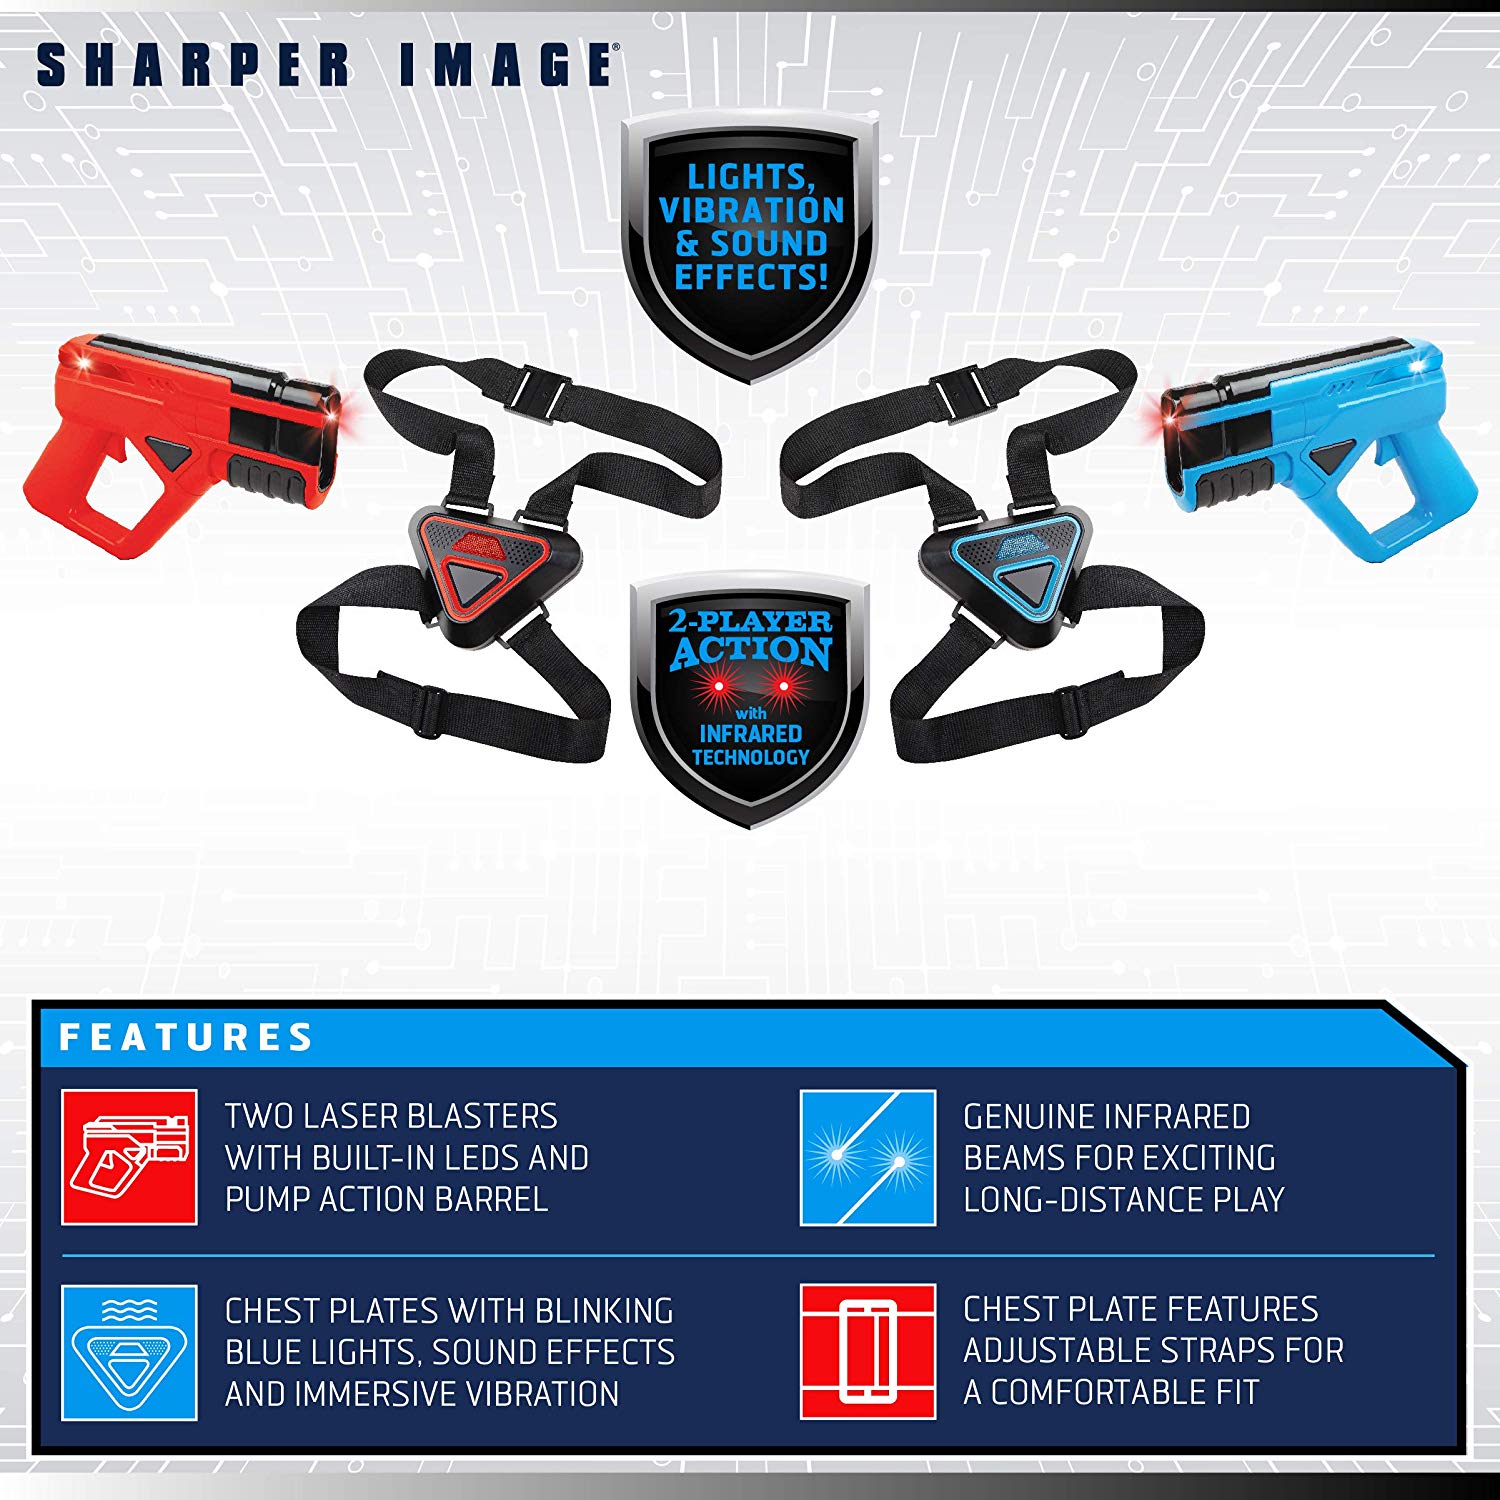 sharper image two player electronic laser tag